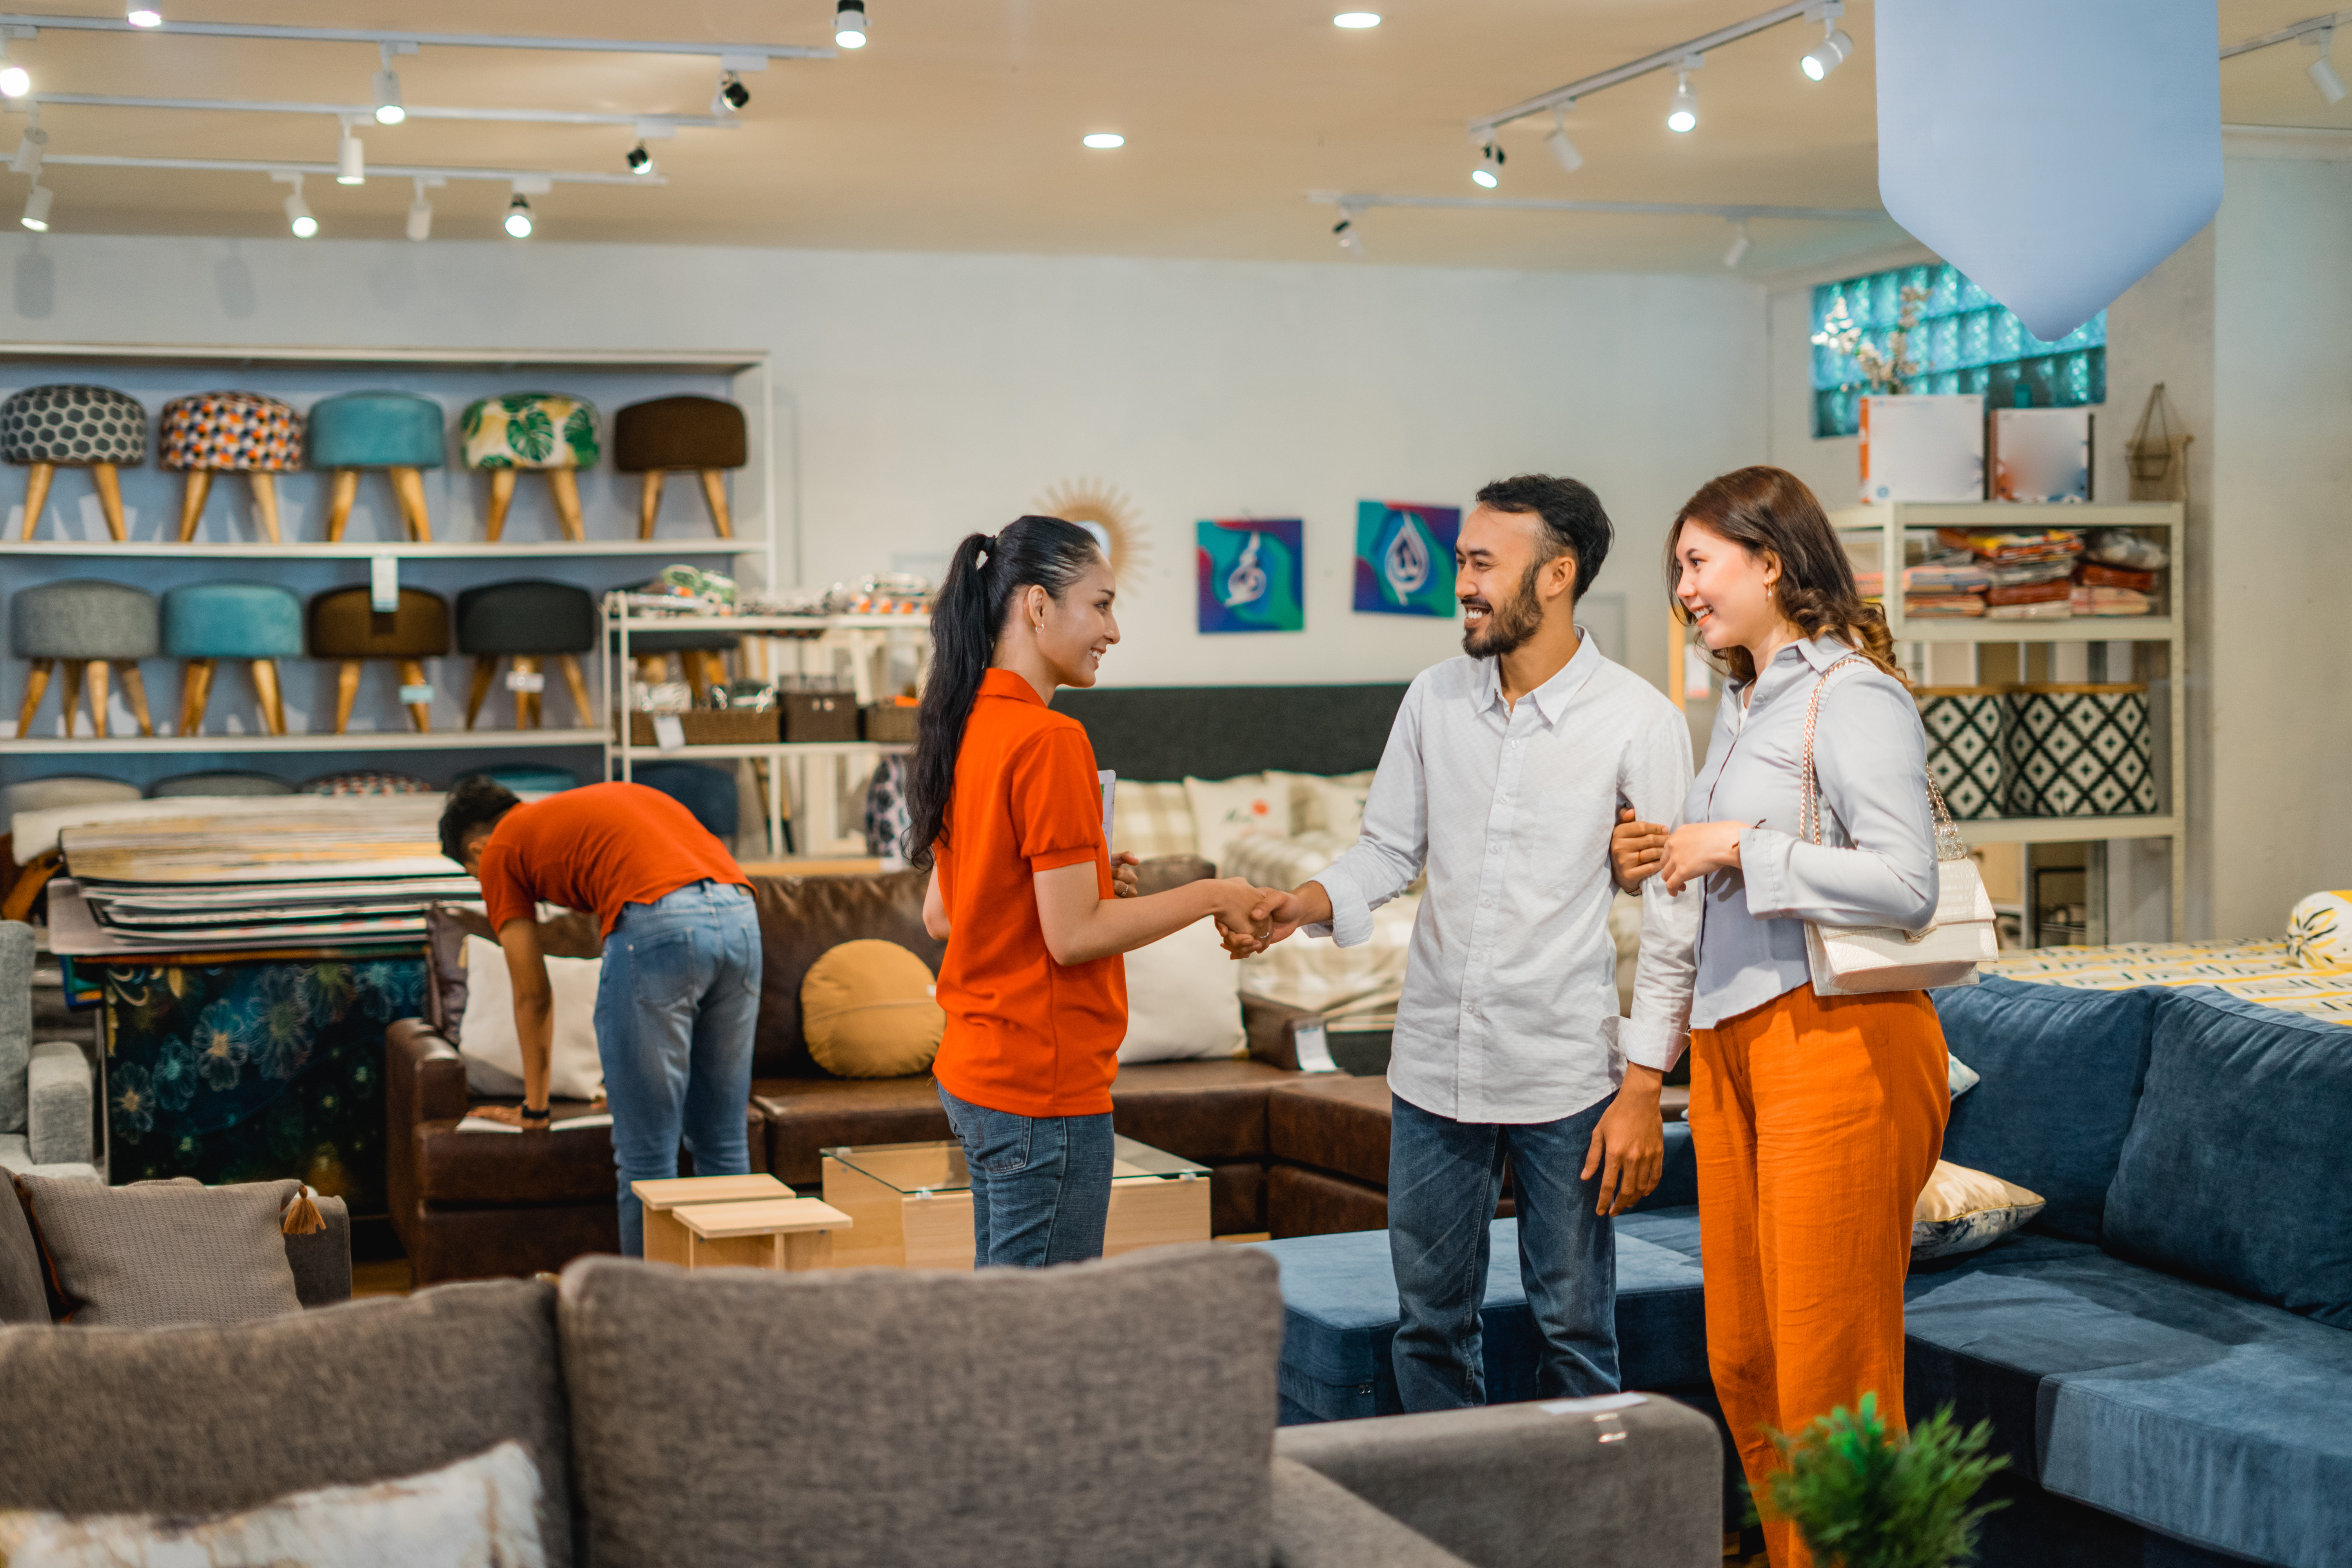 A smiling employee warmly engages with a happy couple, discussing furniture options for their home in the inviting atmosphere of the store.